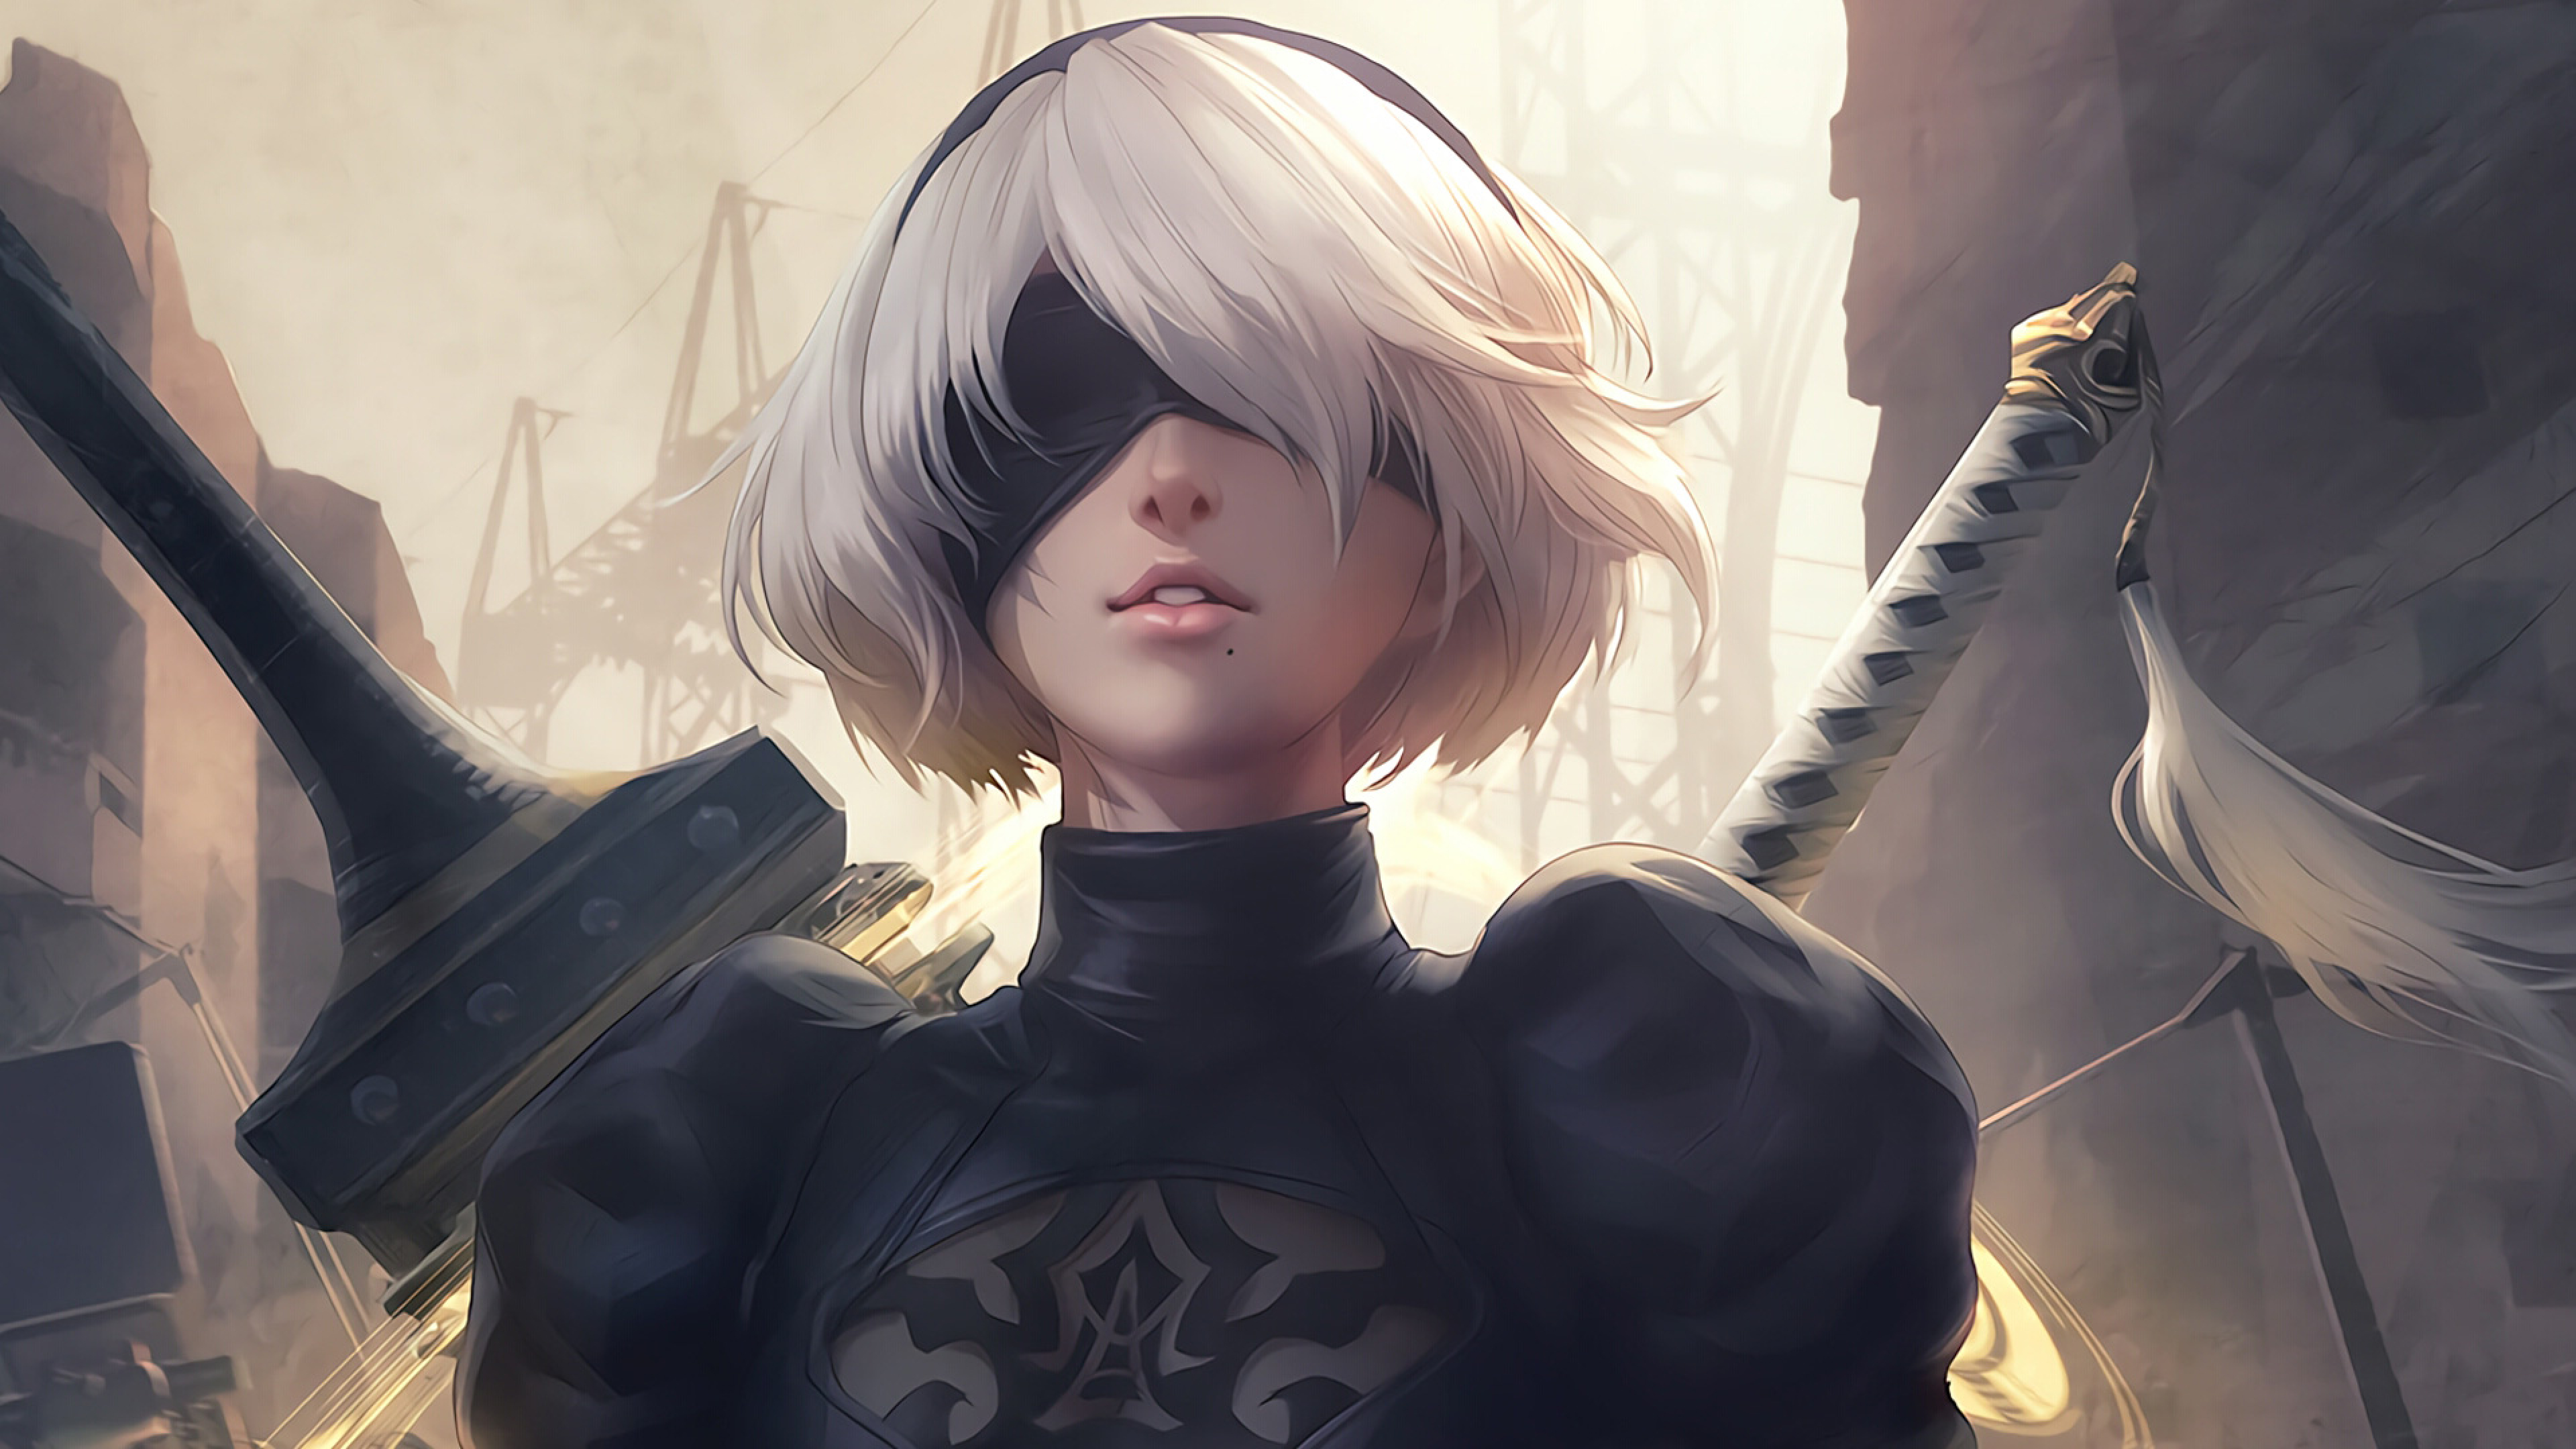 3840x2160 2b Nier Automata 4k Wallpaper Hd Anime 4k Wallpapers Images Photos And Background